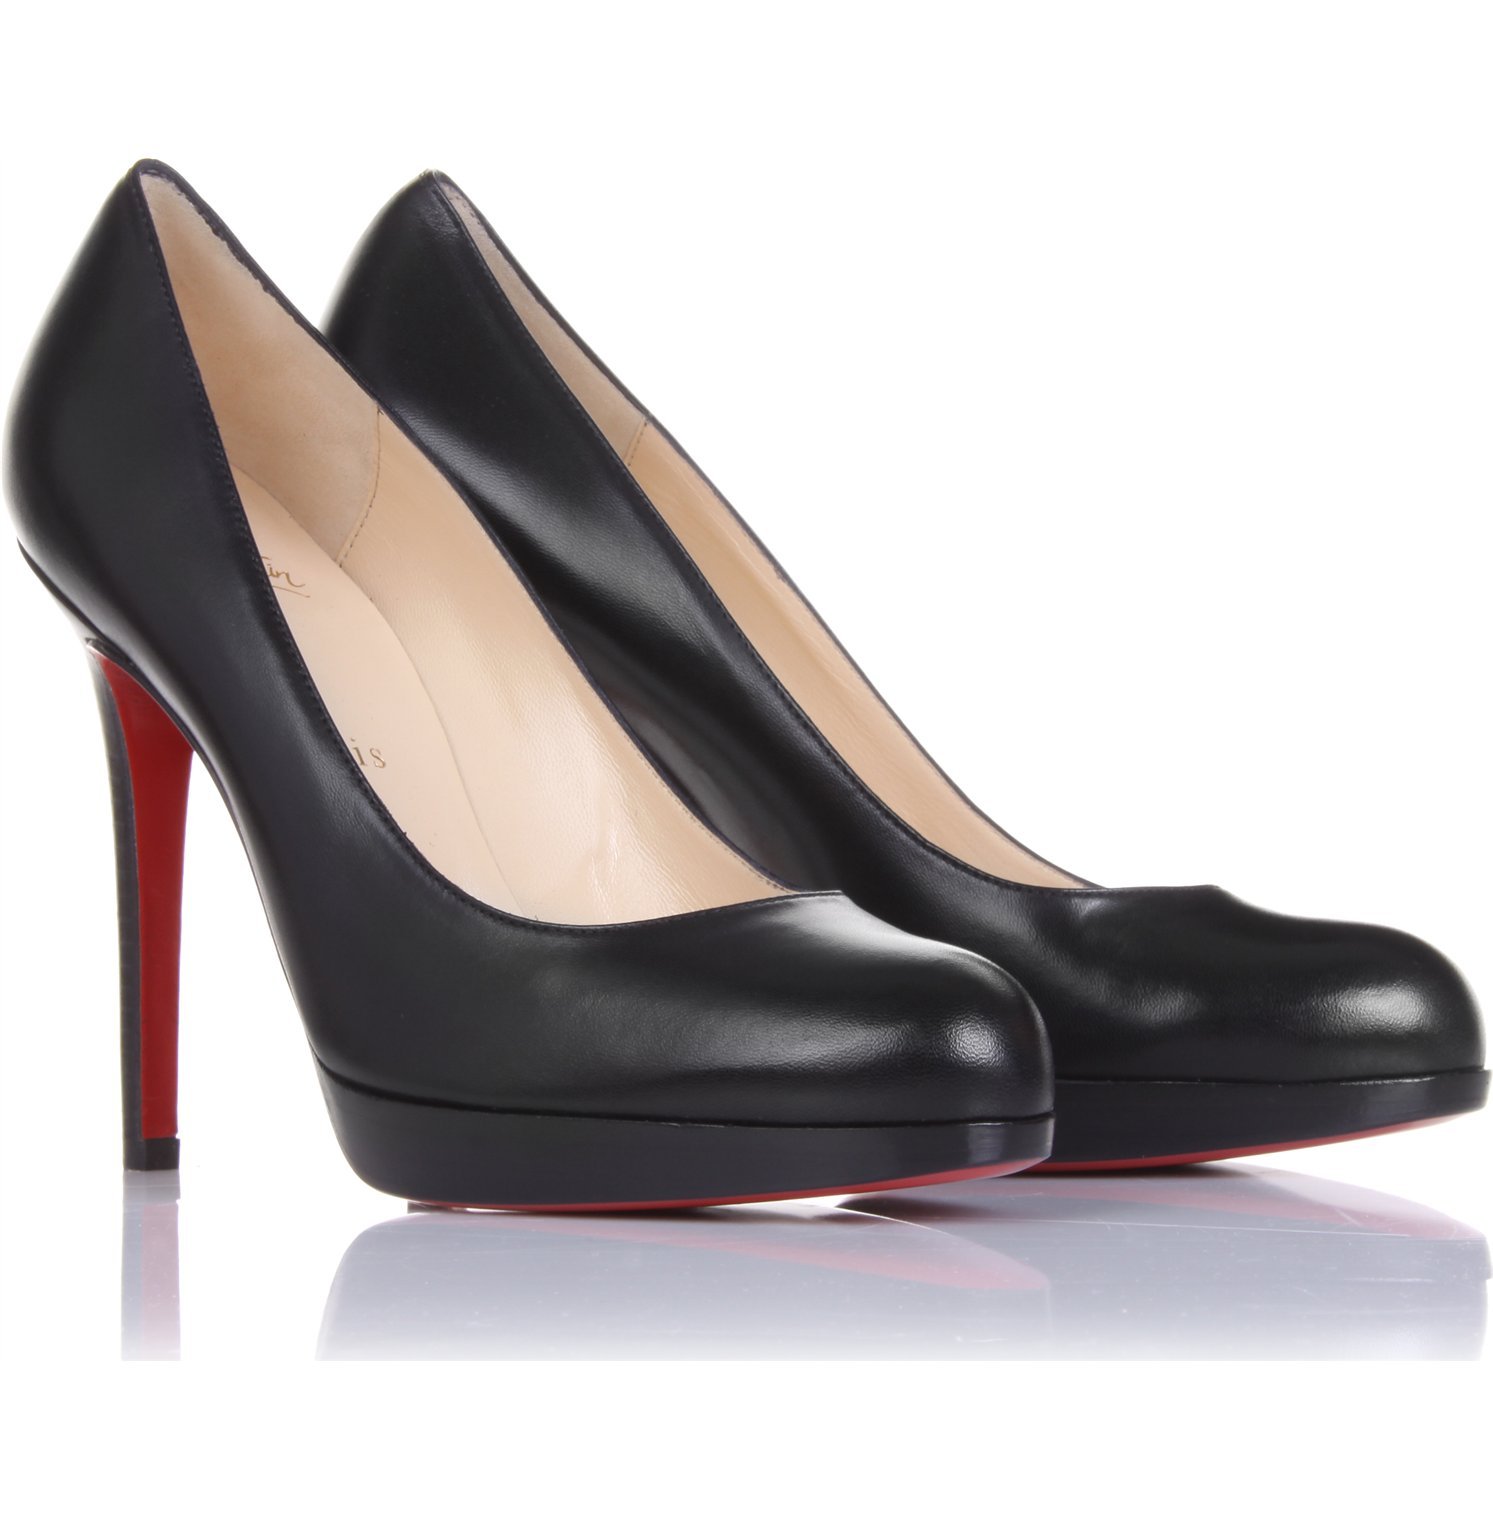 christian louboutin New Simple round-toe pumps Black leather | The ...  